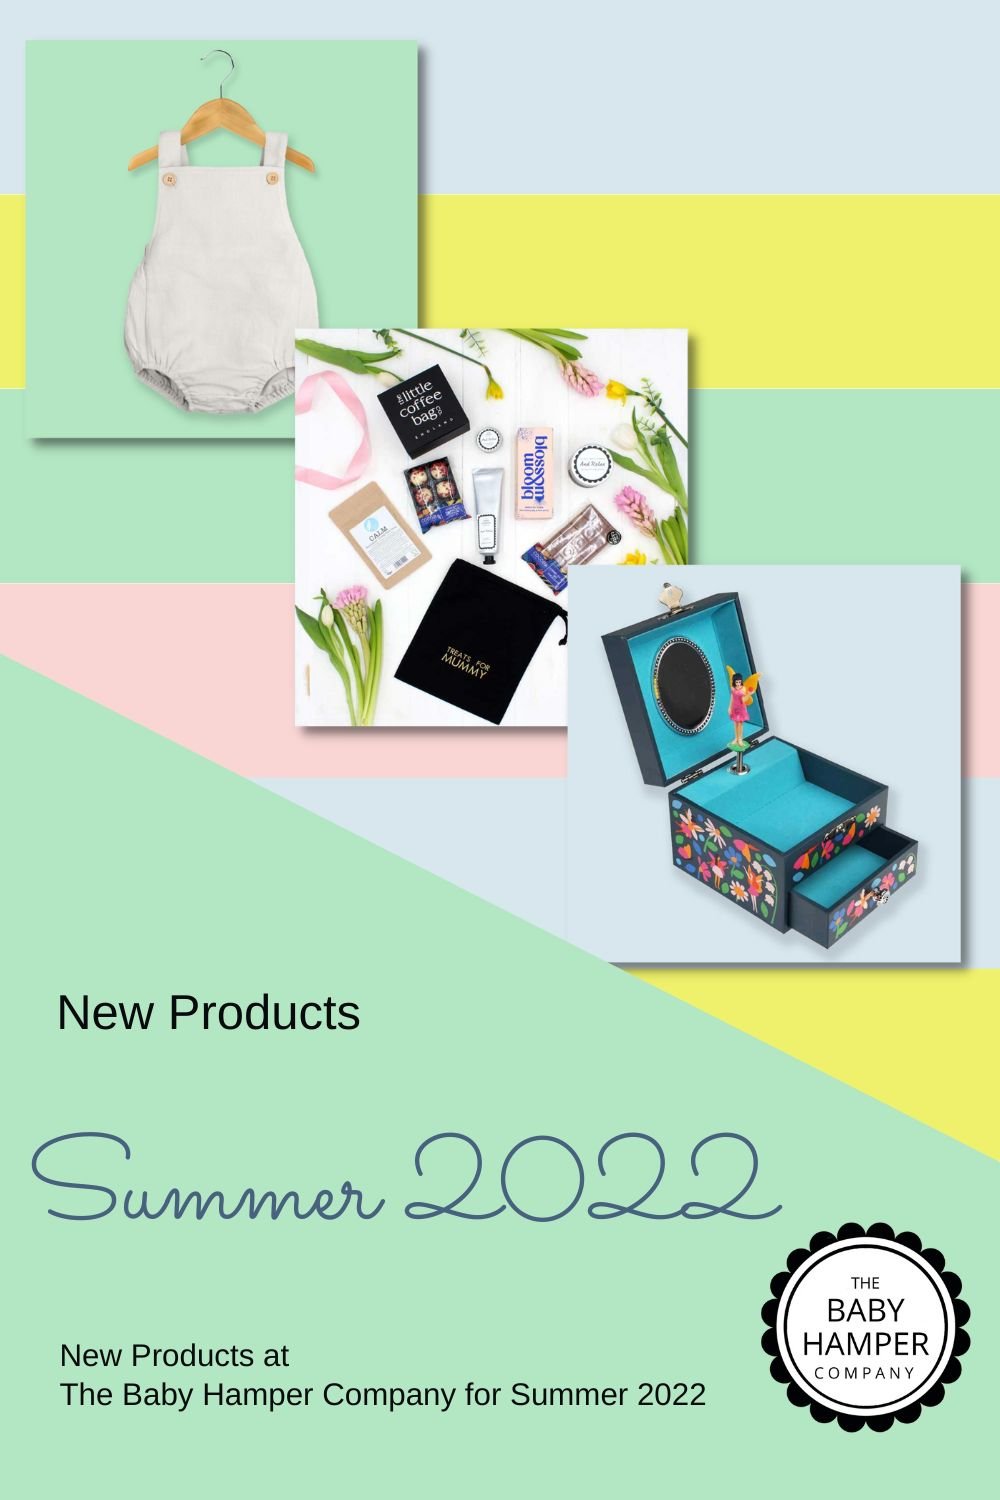 New Products at The Baby Hamper Company for Summer 2022